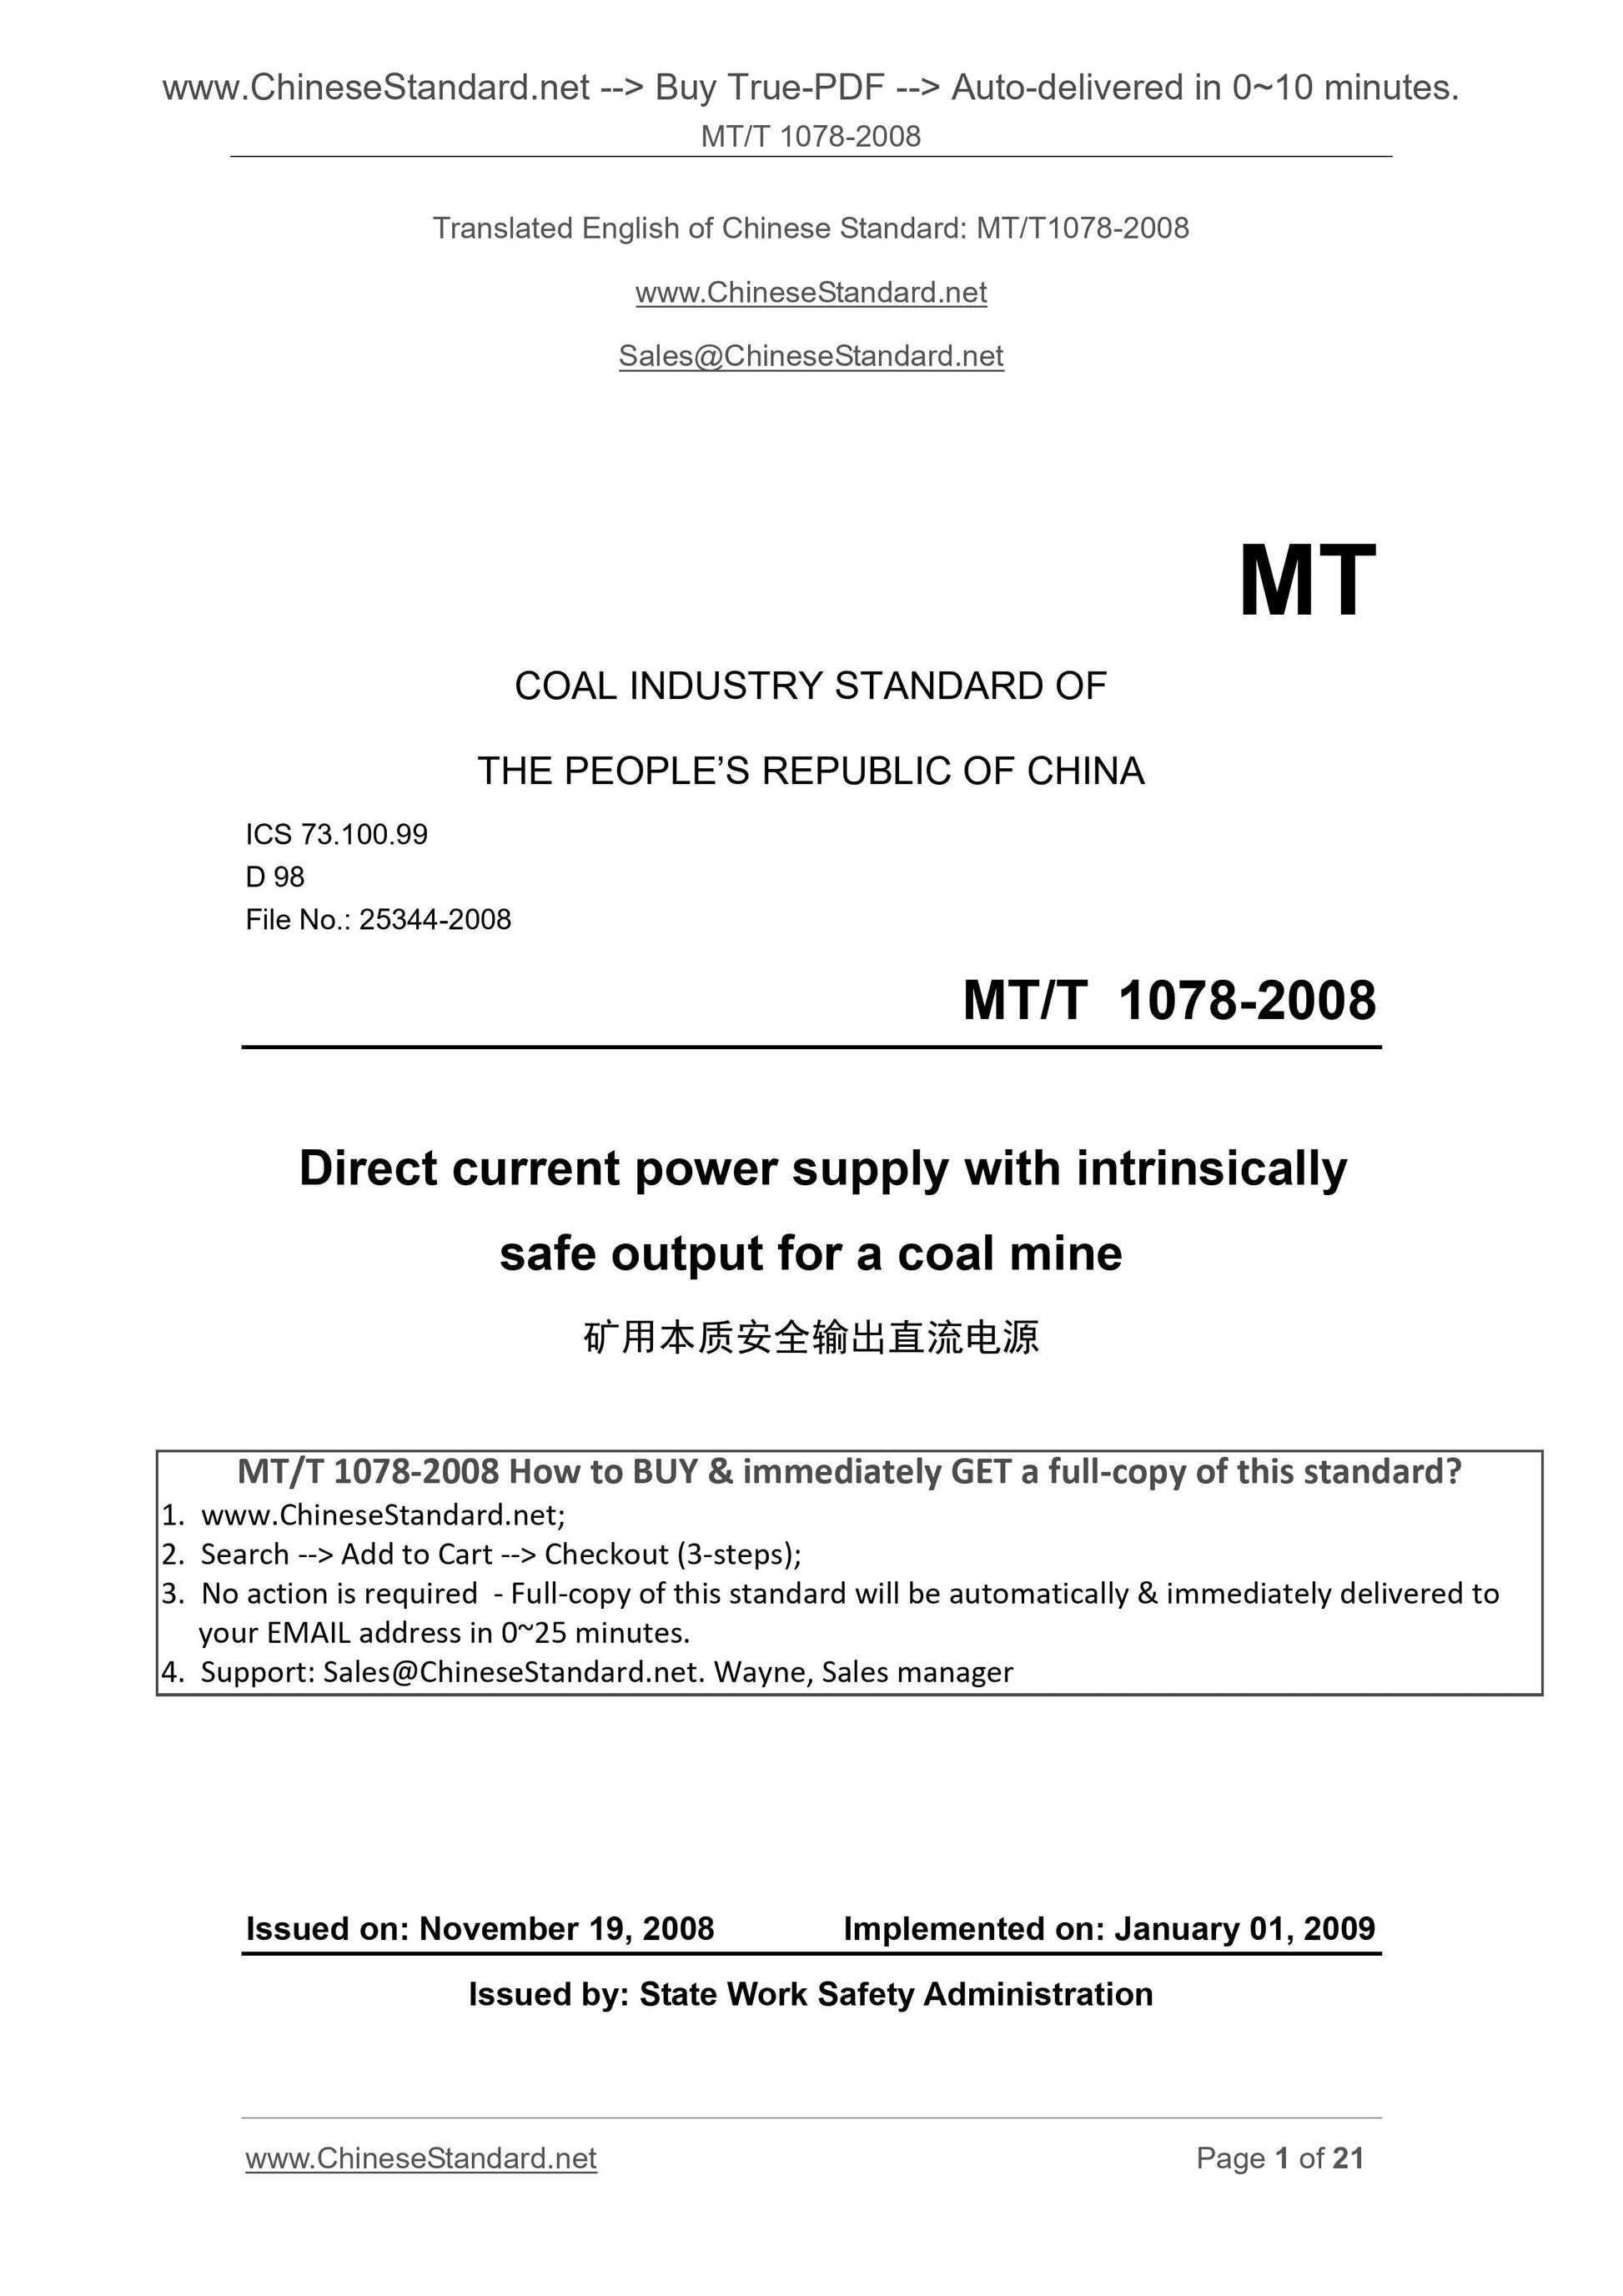 MT/T 1078-2008 Page 1